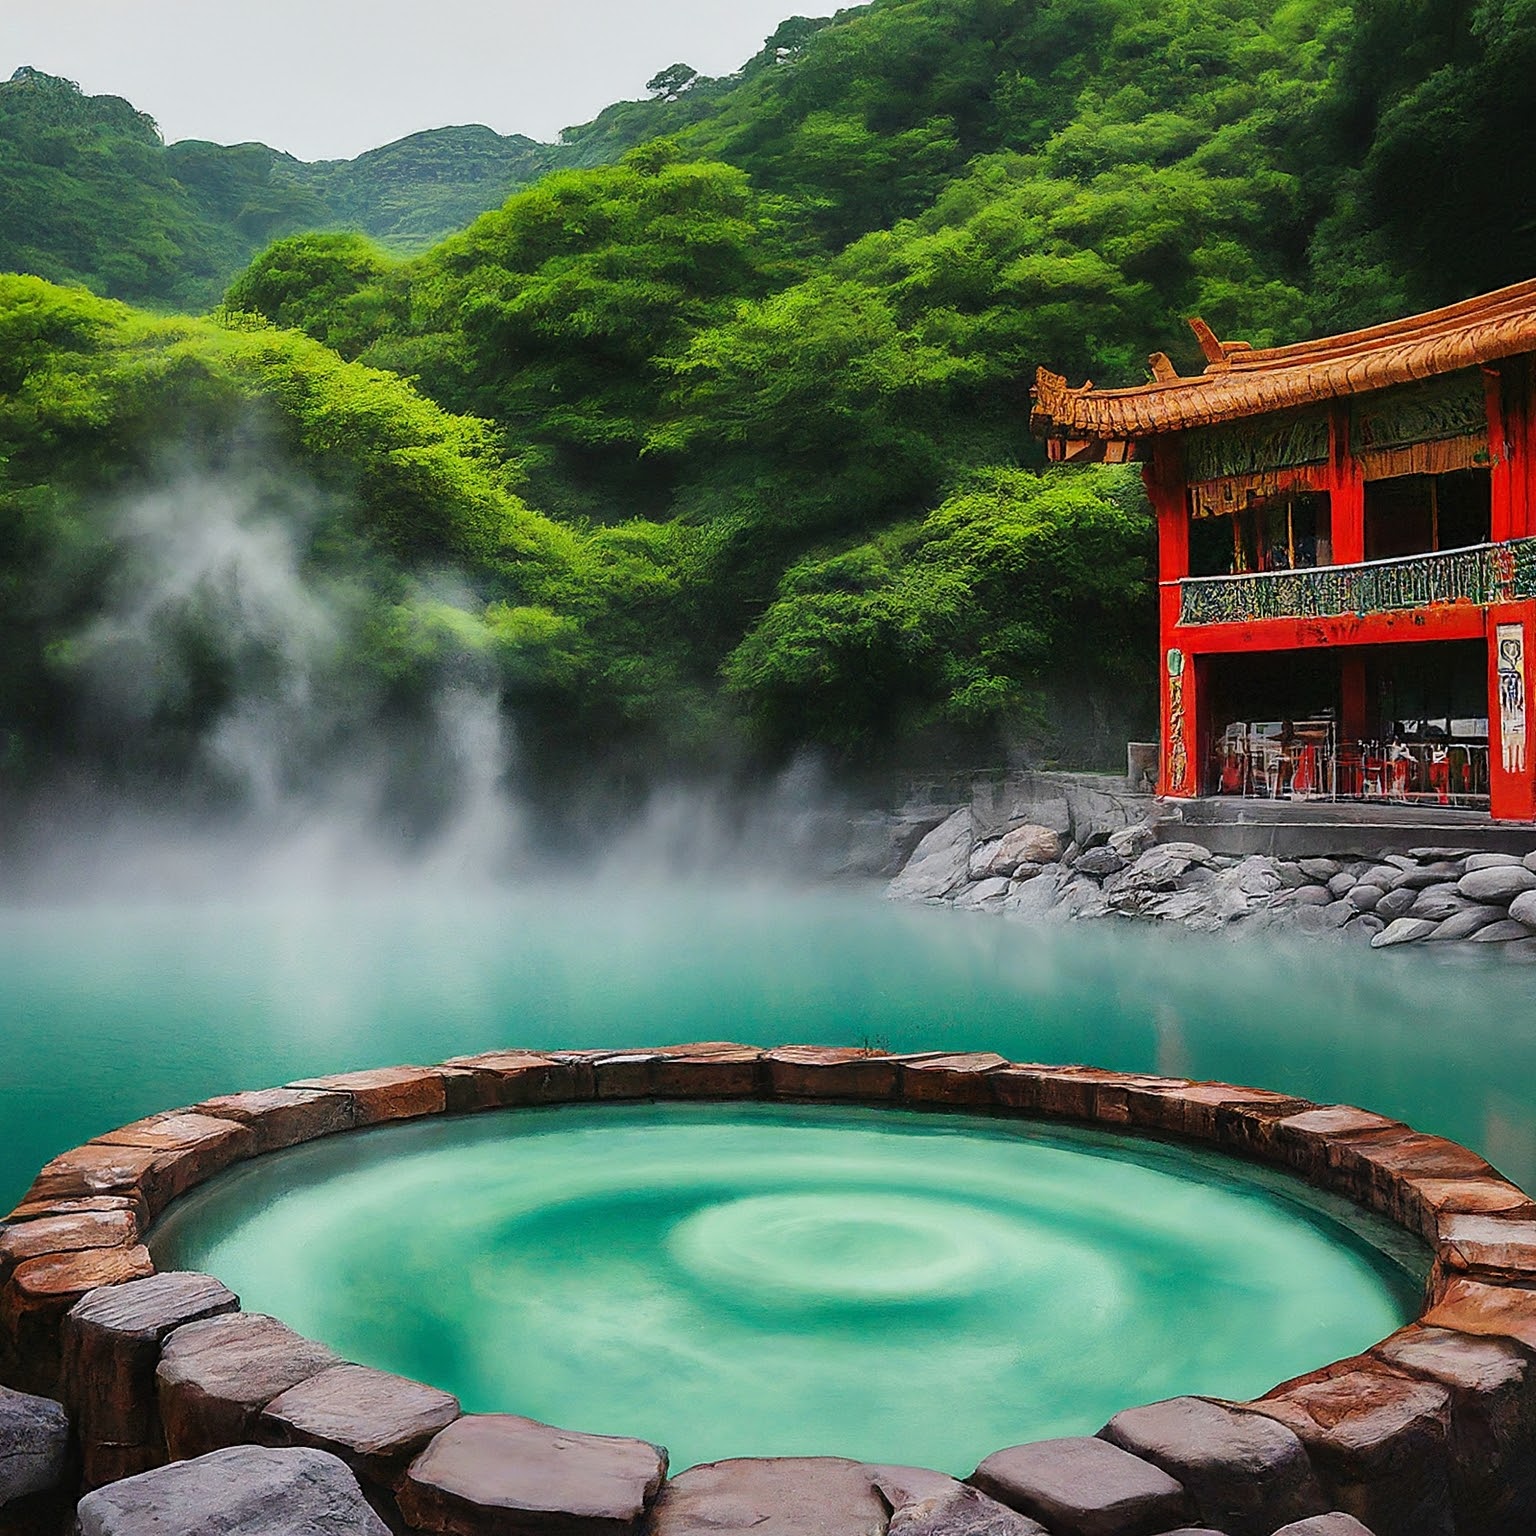 Traditional hot spring pool at Beitou Hot Springs, Taiwan, with steam rising and surrounded by greenery.